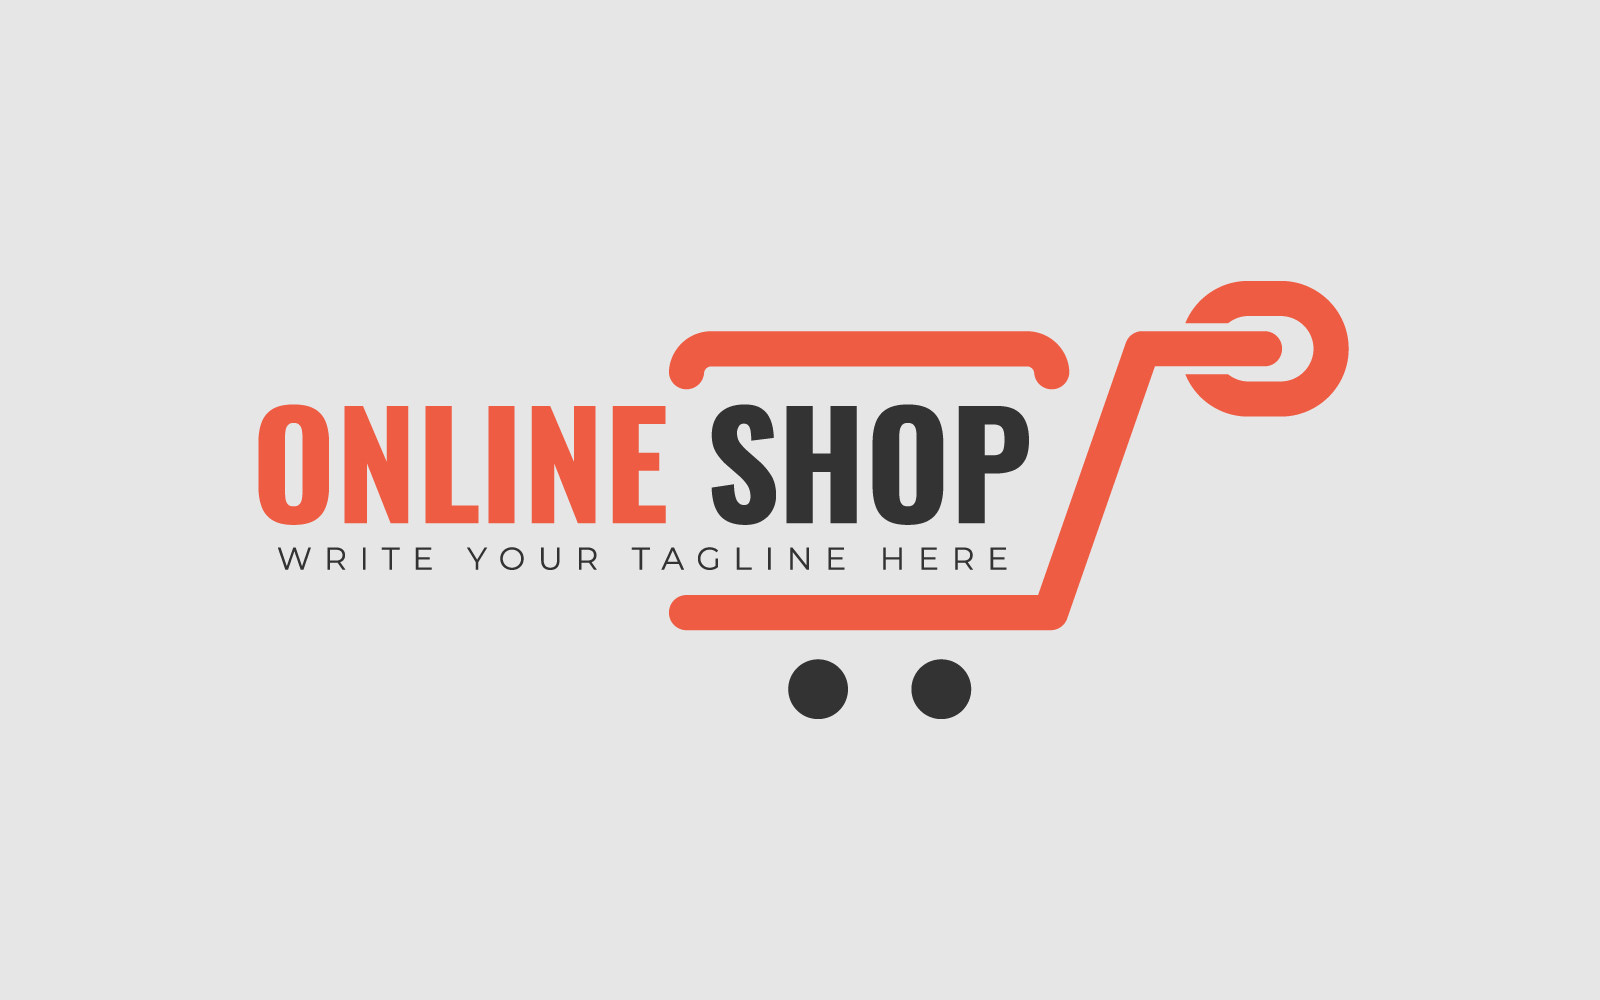 Shopping Logo Design For Online Business With Cart For E-Commerce Web Or Business.